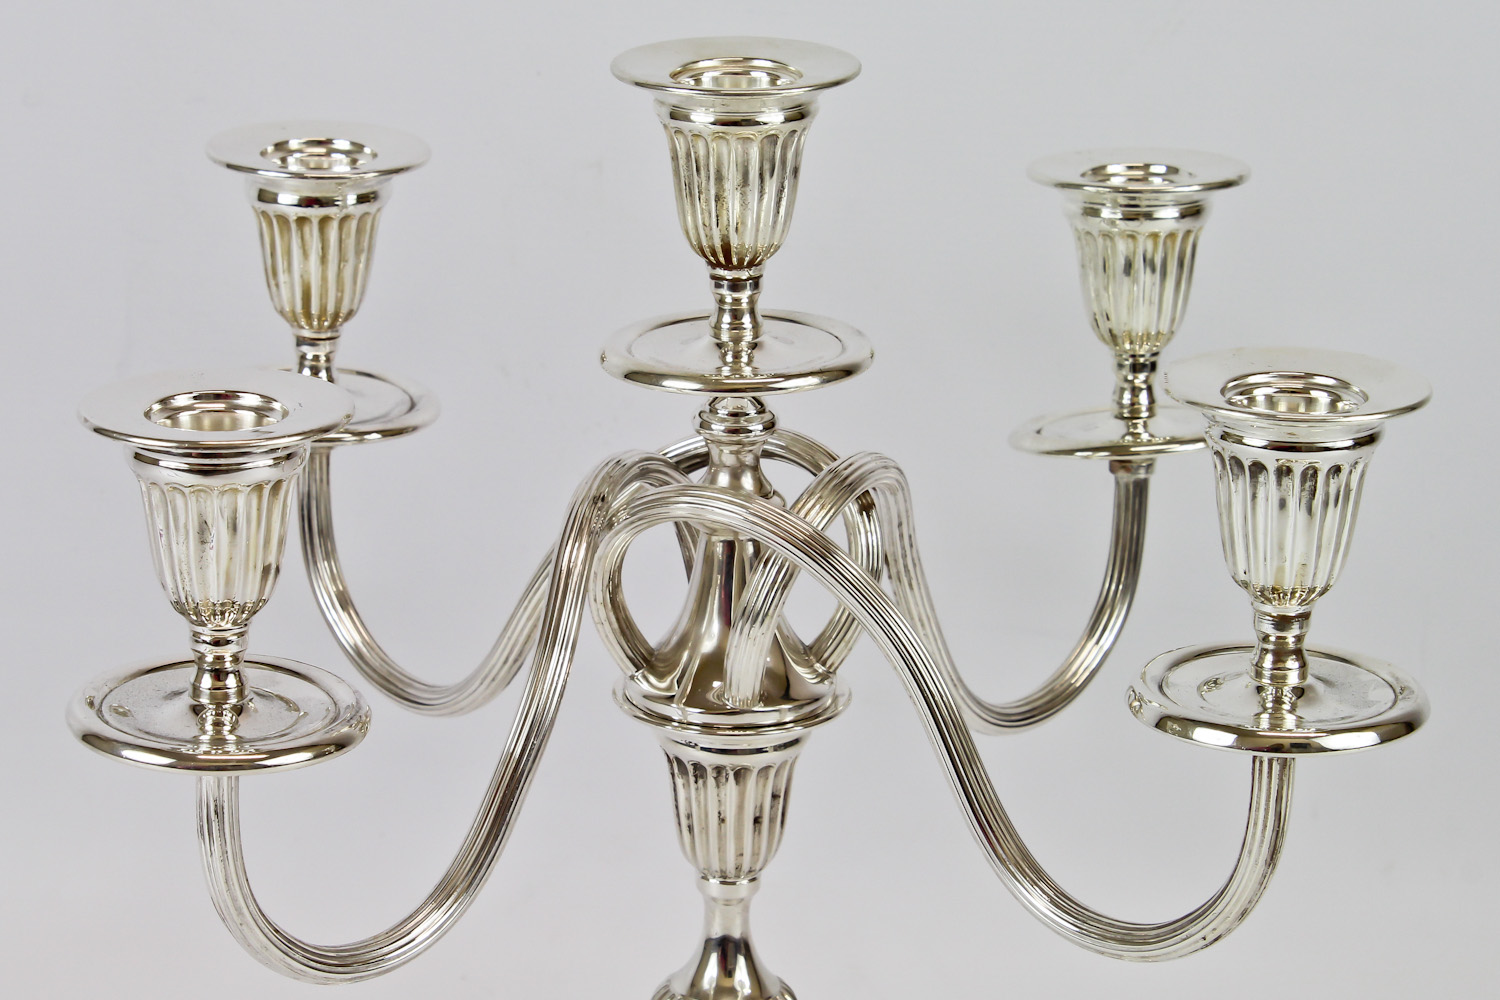 A silver plated five-light scroll arm candelabra, 34.5cm high - Image 2 of 2